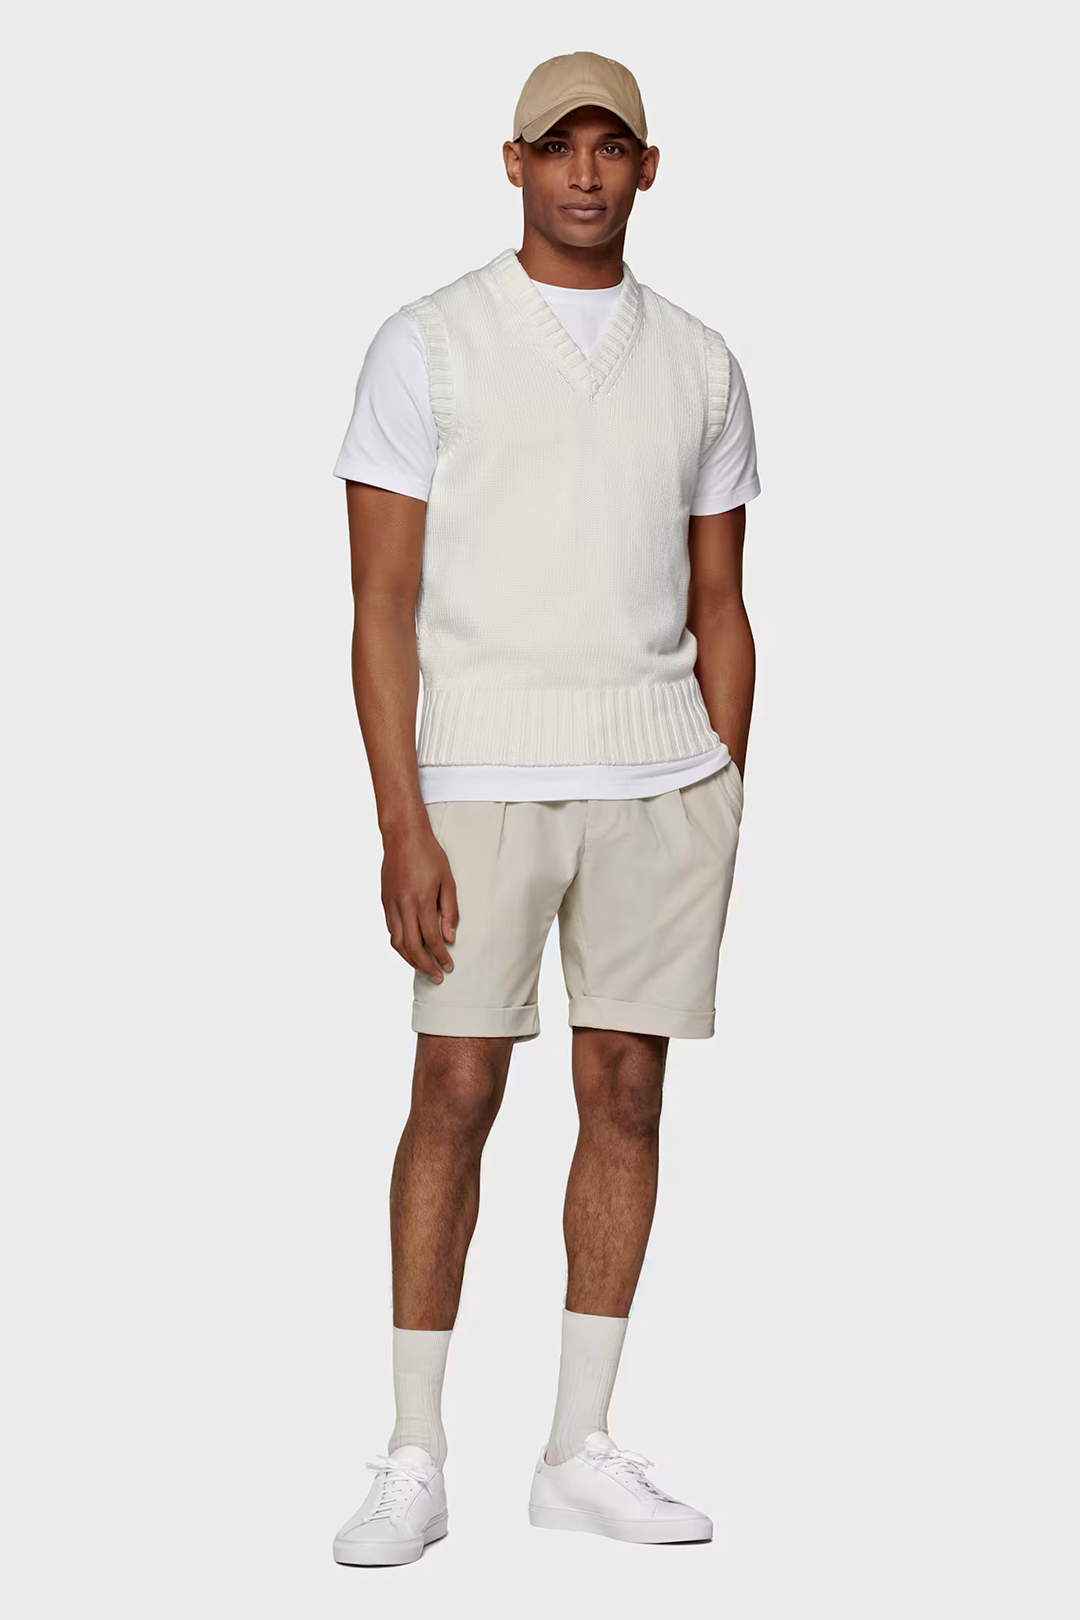 White sweater vest, white t-shirt, cream shorts and white sneakers outfit